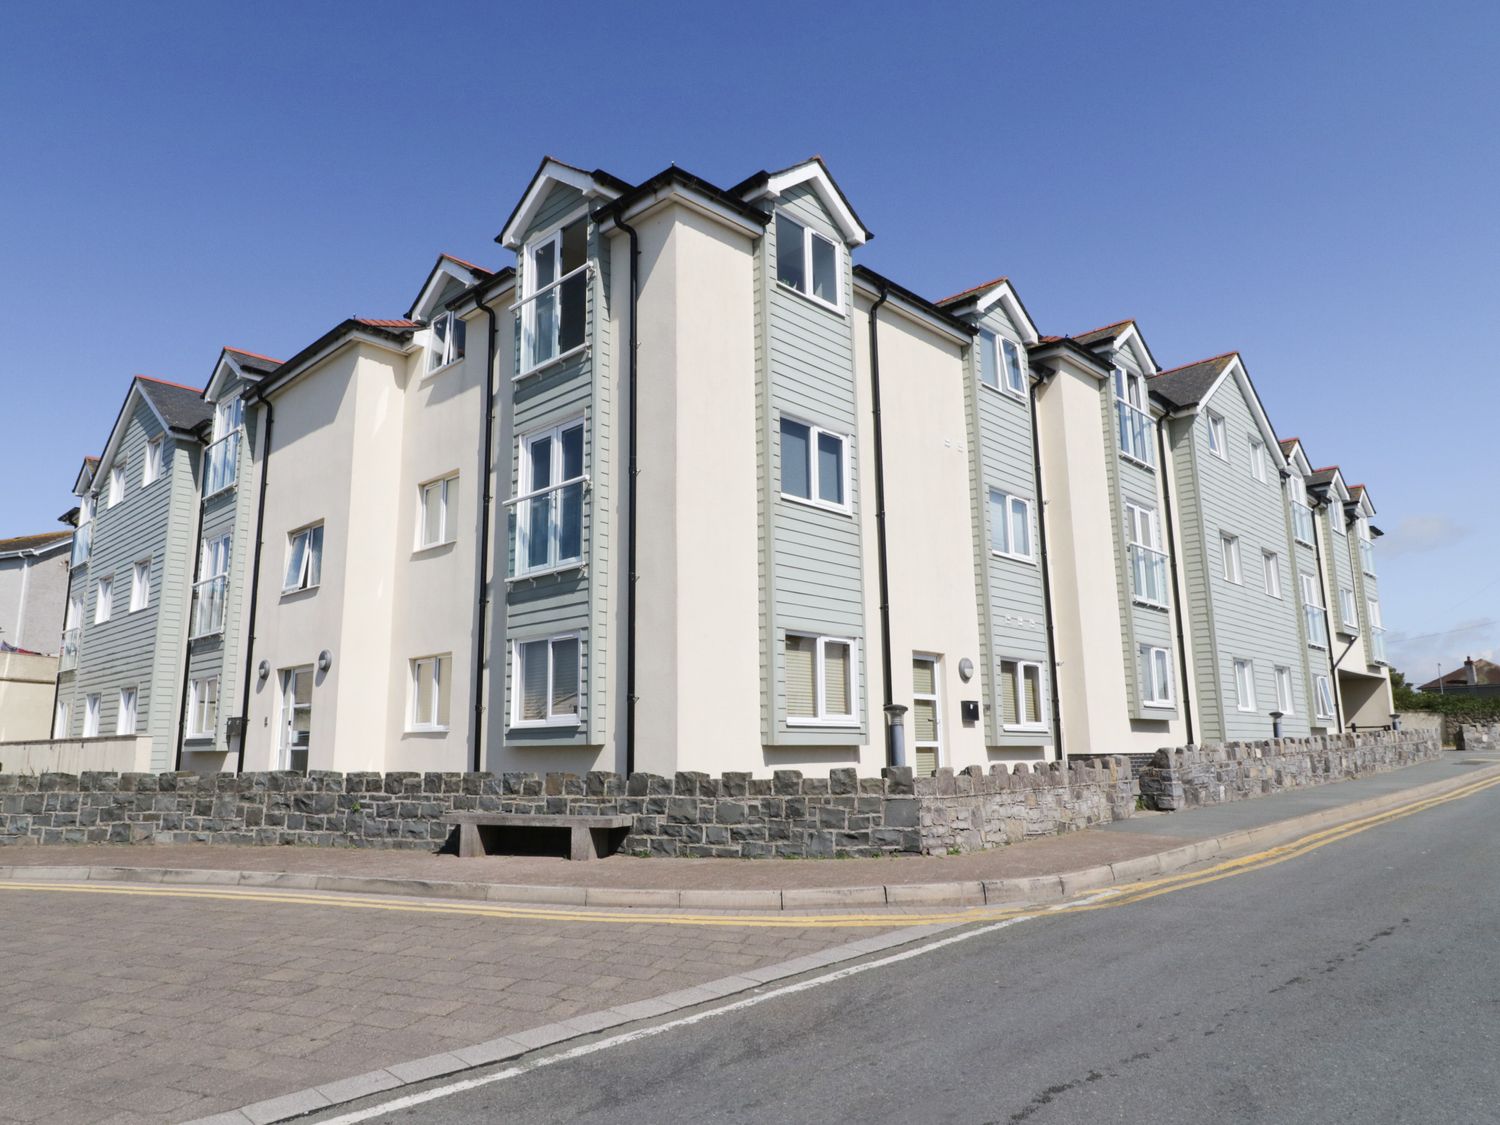 10 Pen Llanw Tides Reach - Anglesey - 1023940 - photo 1